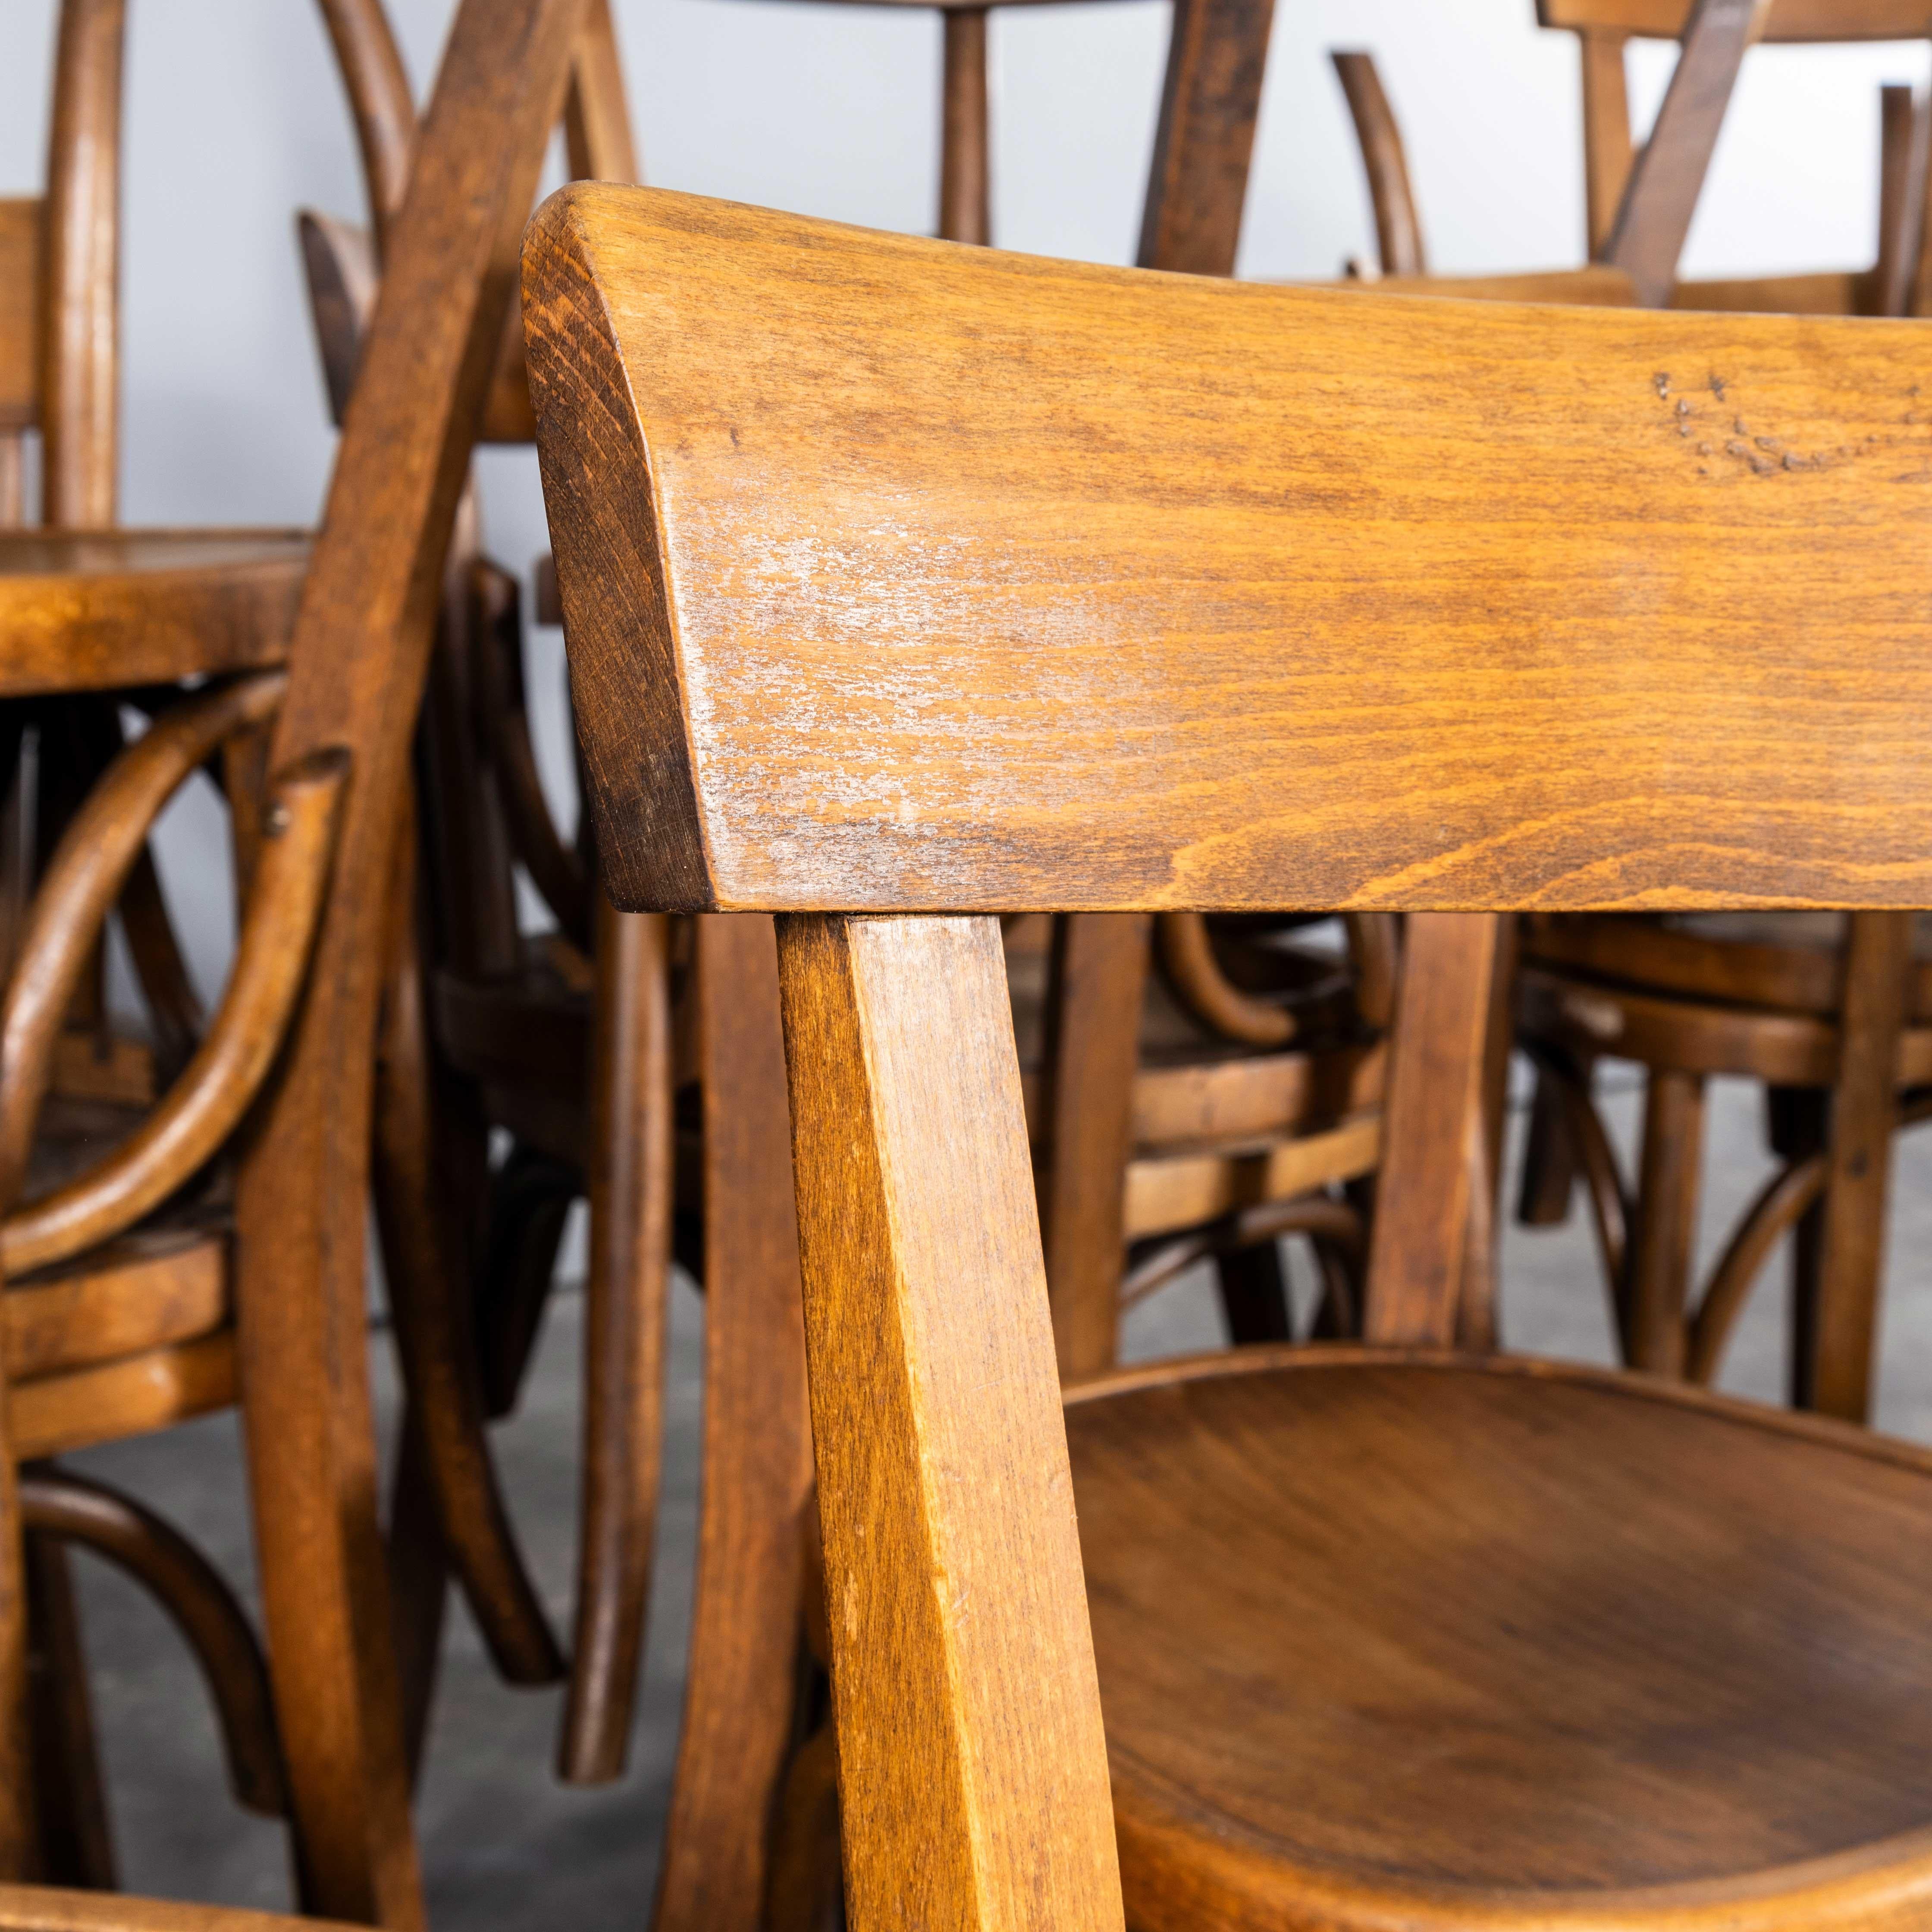 1950’s Fischel French Slim Back Bentwood Dining Chairs – Set Of Seventeen
1950’s Fischel French Slim Back Bentwood Dining Chairs – Set Of Seventeen. The process of steam bending beech to create elegant chairs was discovered and developed by Thonet,